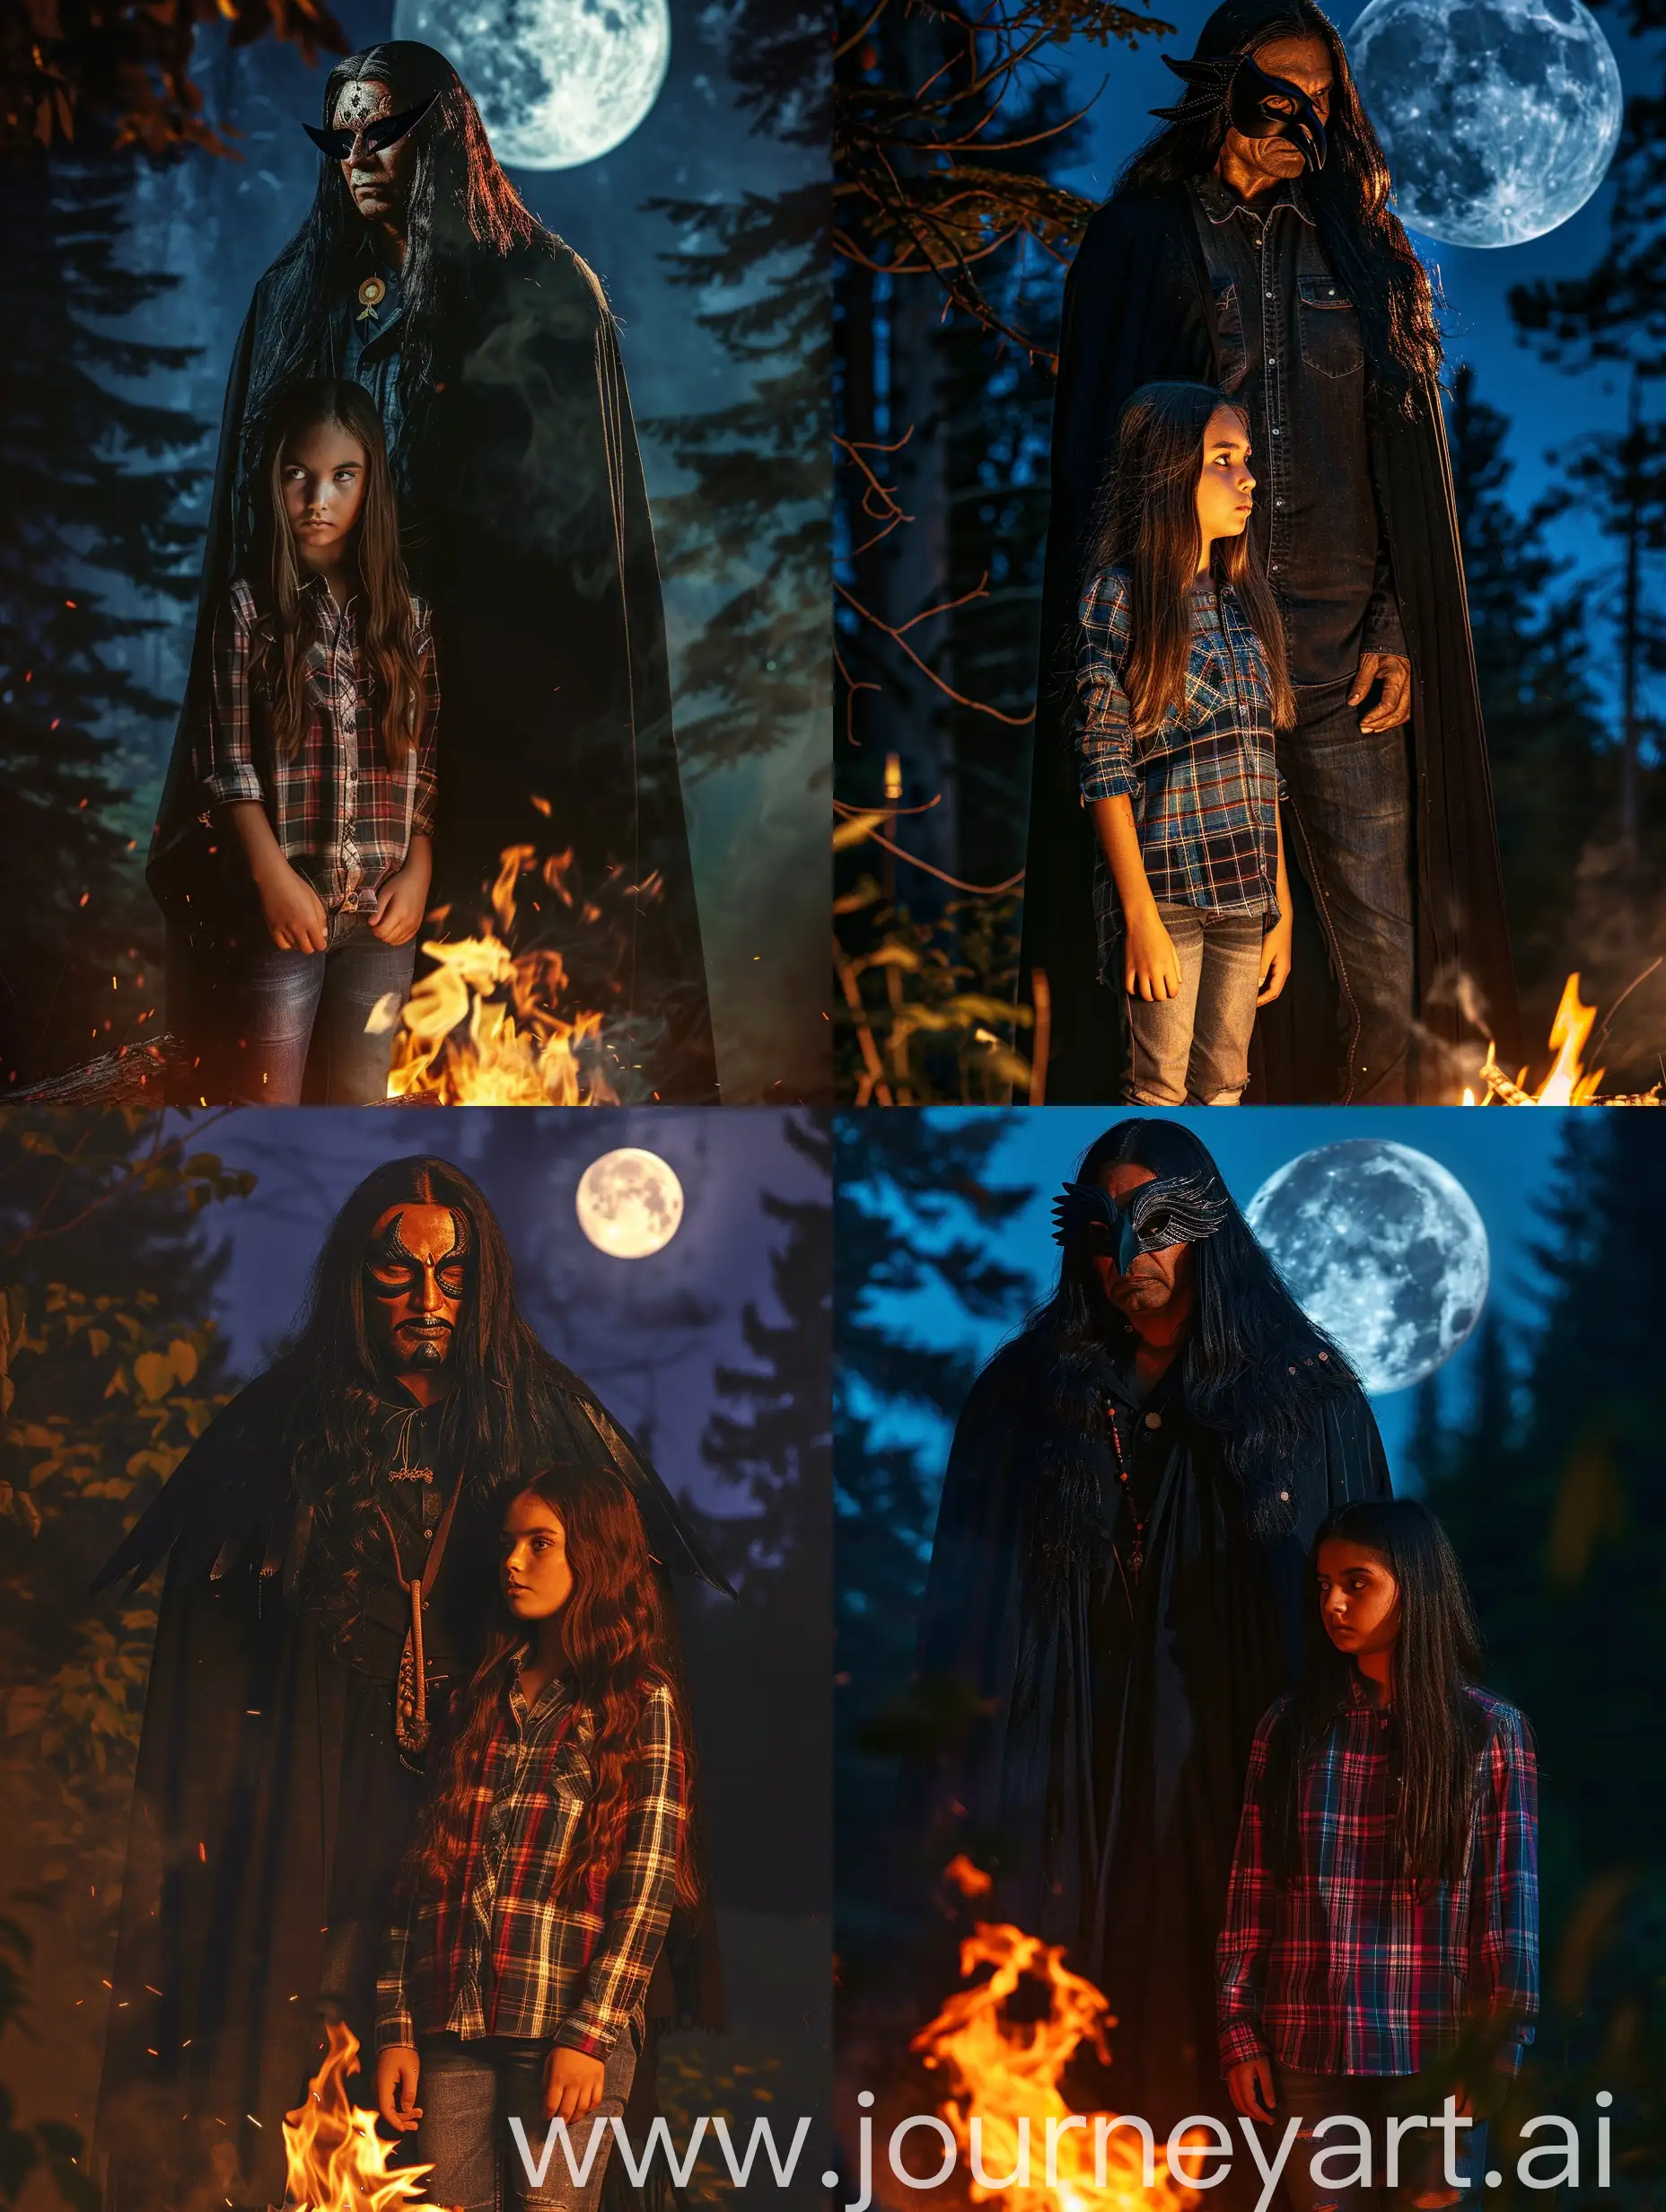 A tall Indian man with long black hair wears a black cloak and a raven mask, he stands behind the girl towering, a girl with long brown hair is dressed in a plaid shirt and jeans, the light from the campfire flame falls on them, against the background of the night forest and the moon